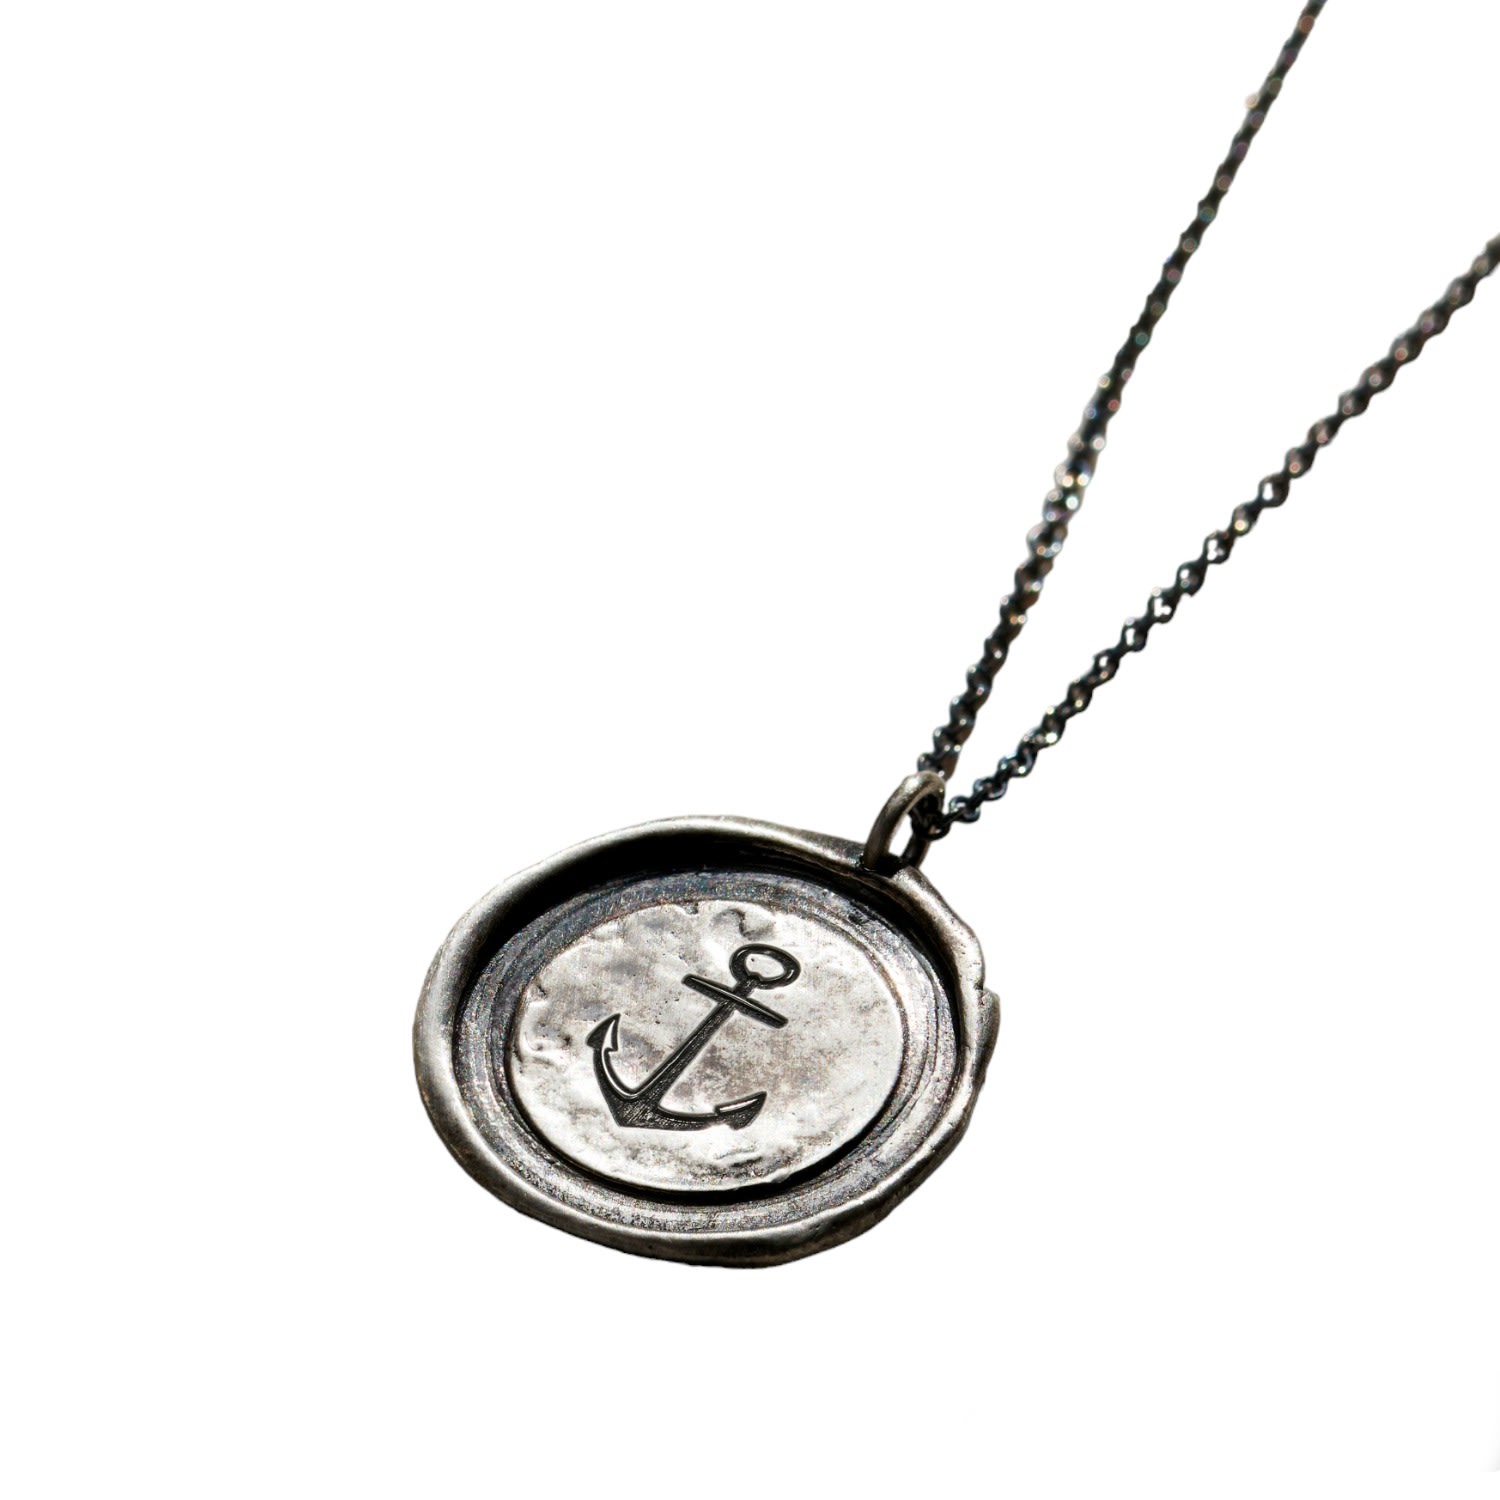 Men’s Oxidised Sterling Silver Anchor Wax Seal Necklace Posh Totty Designs